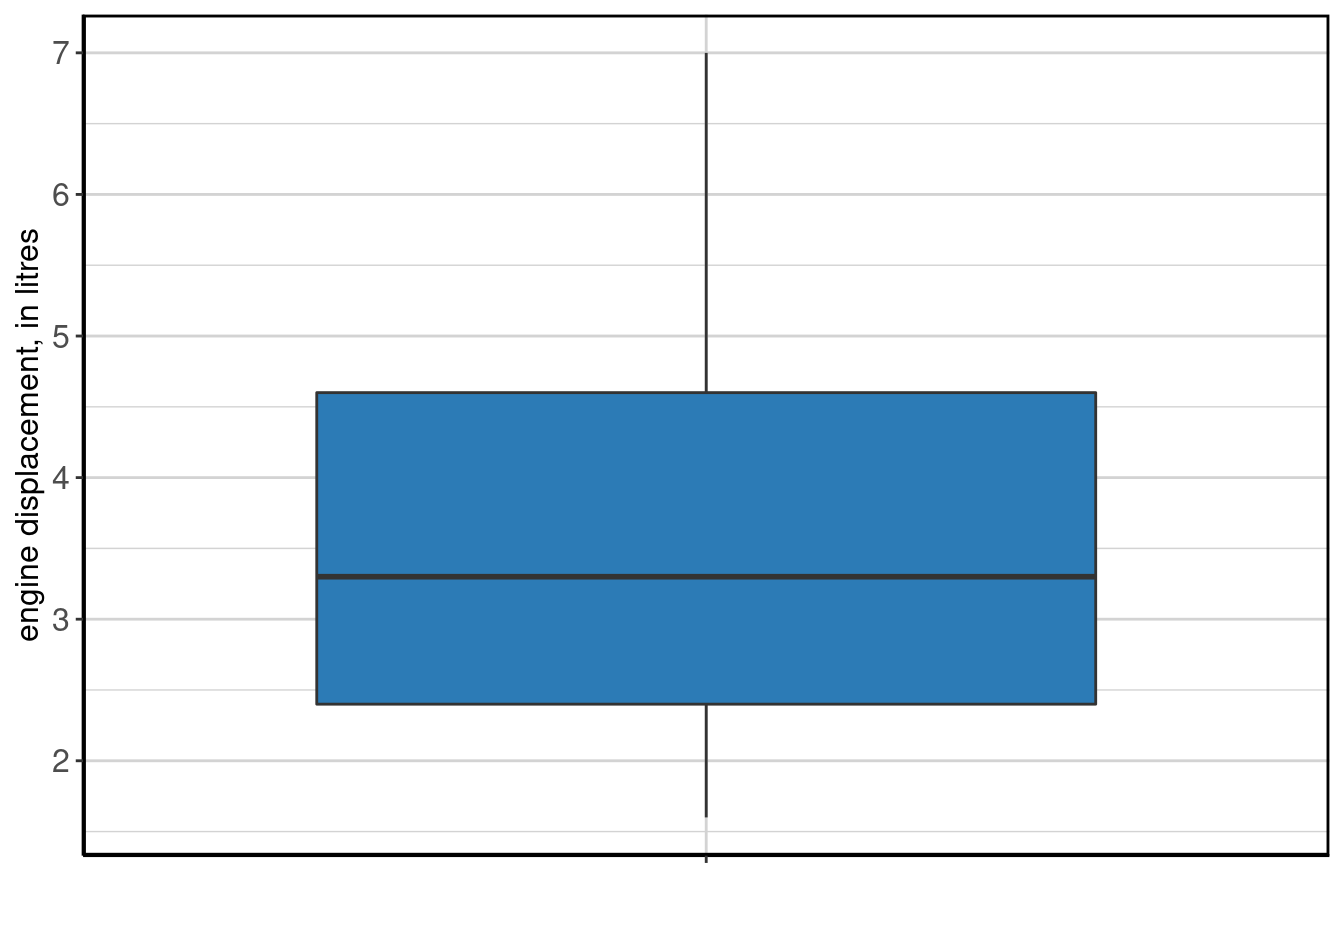 Boxplot of <b>engine displacement, in litres</b>.